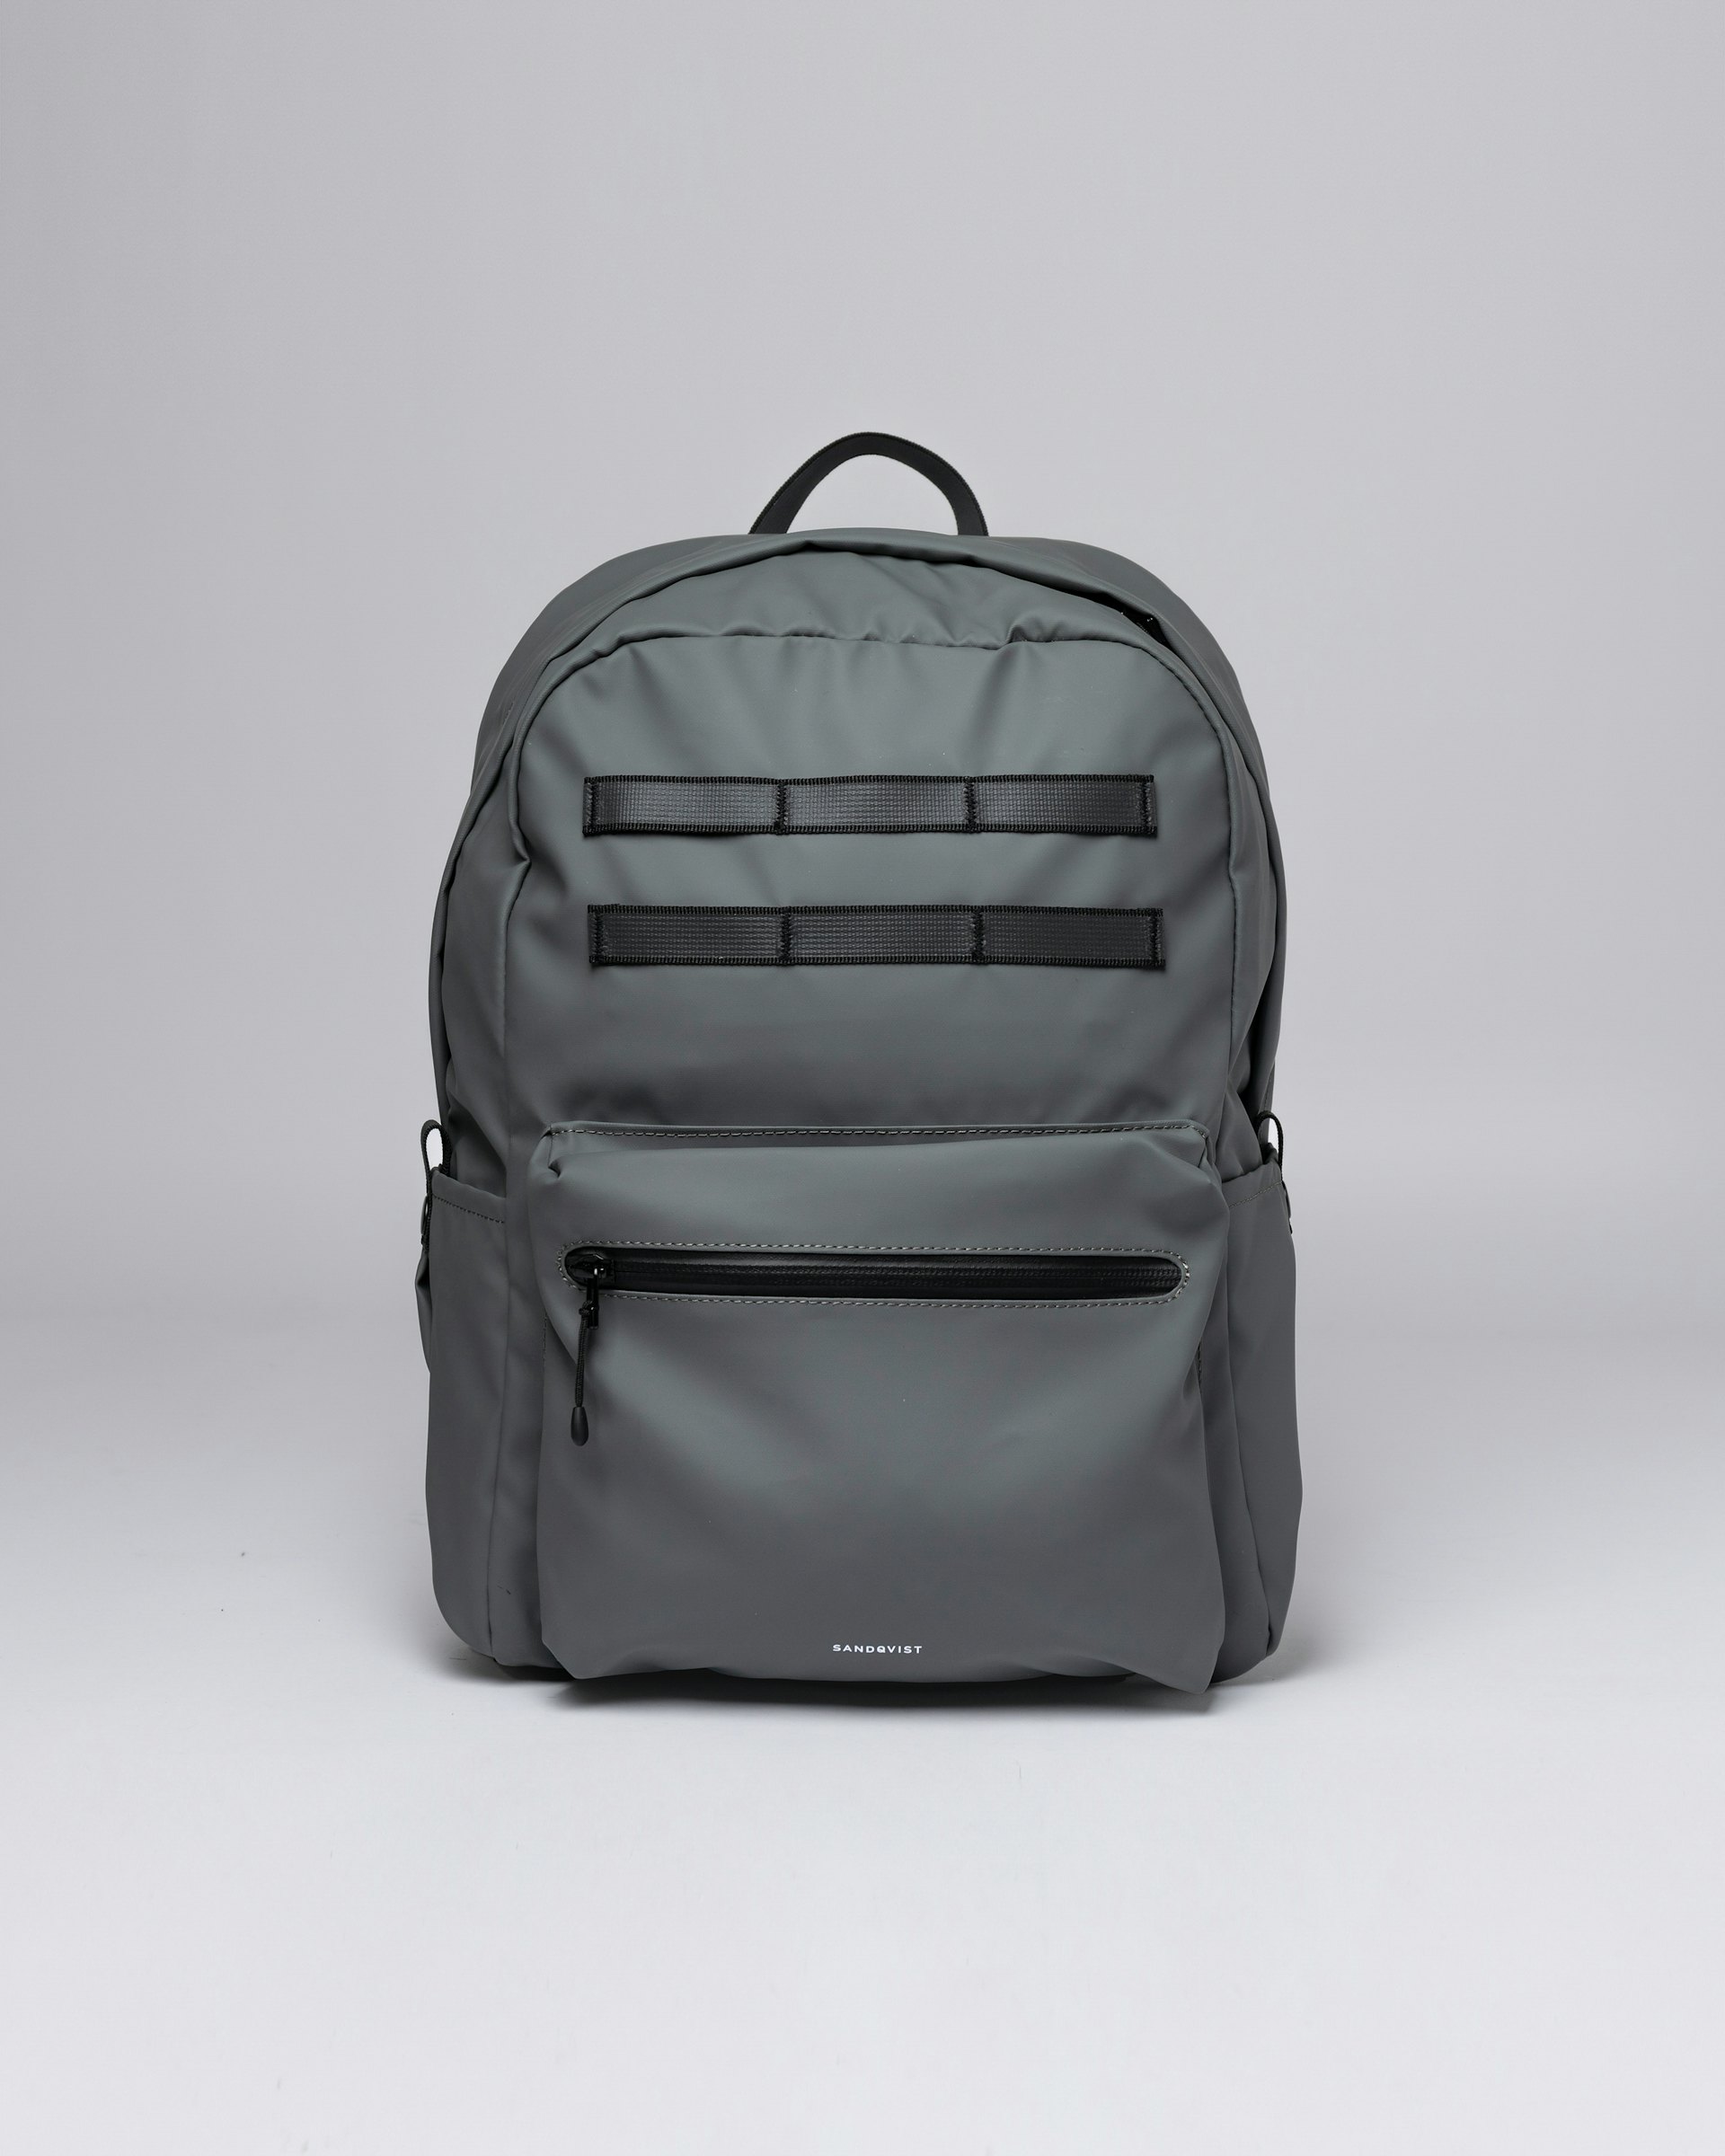 Alvar belongs to the category Backpacks and is in color ash grey (1 of 6)